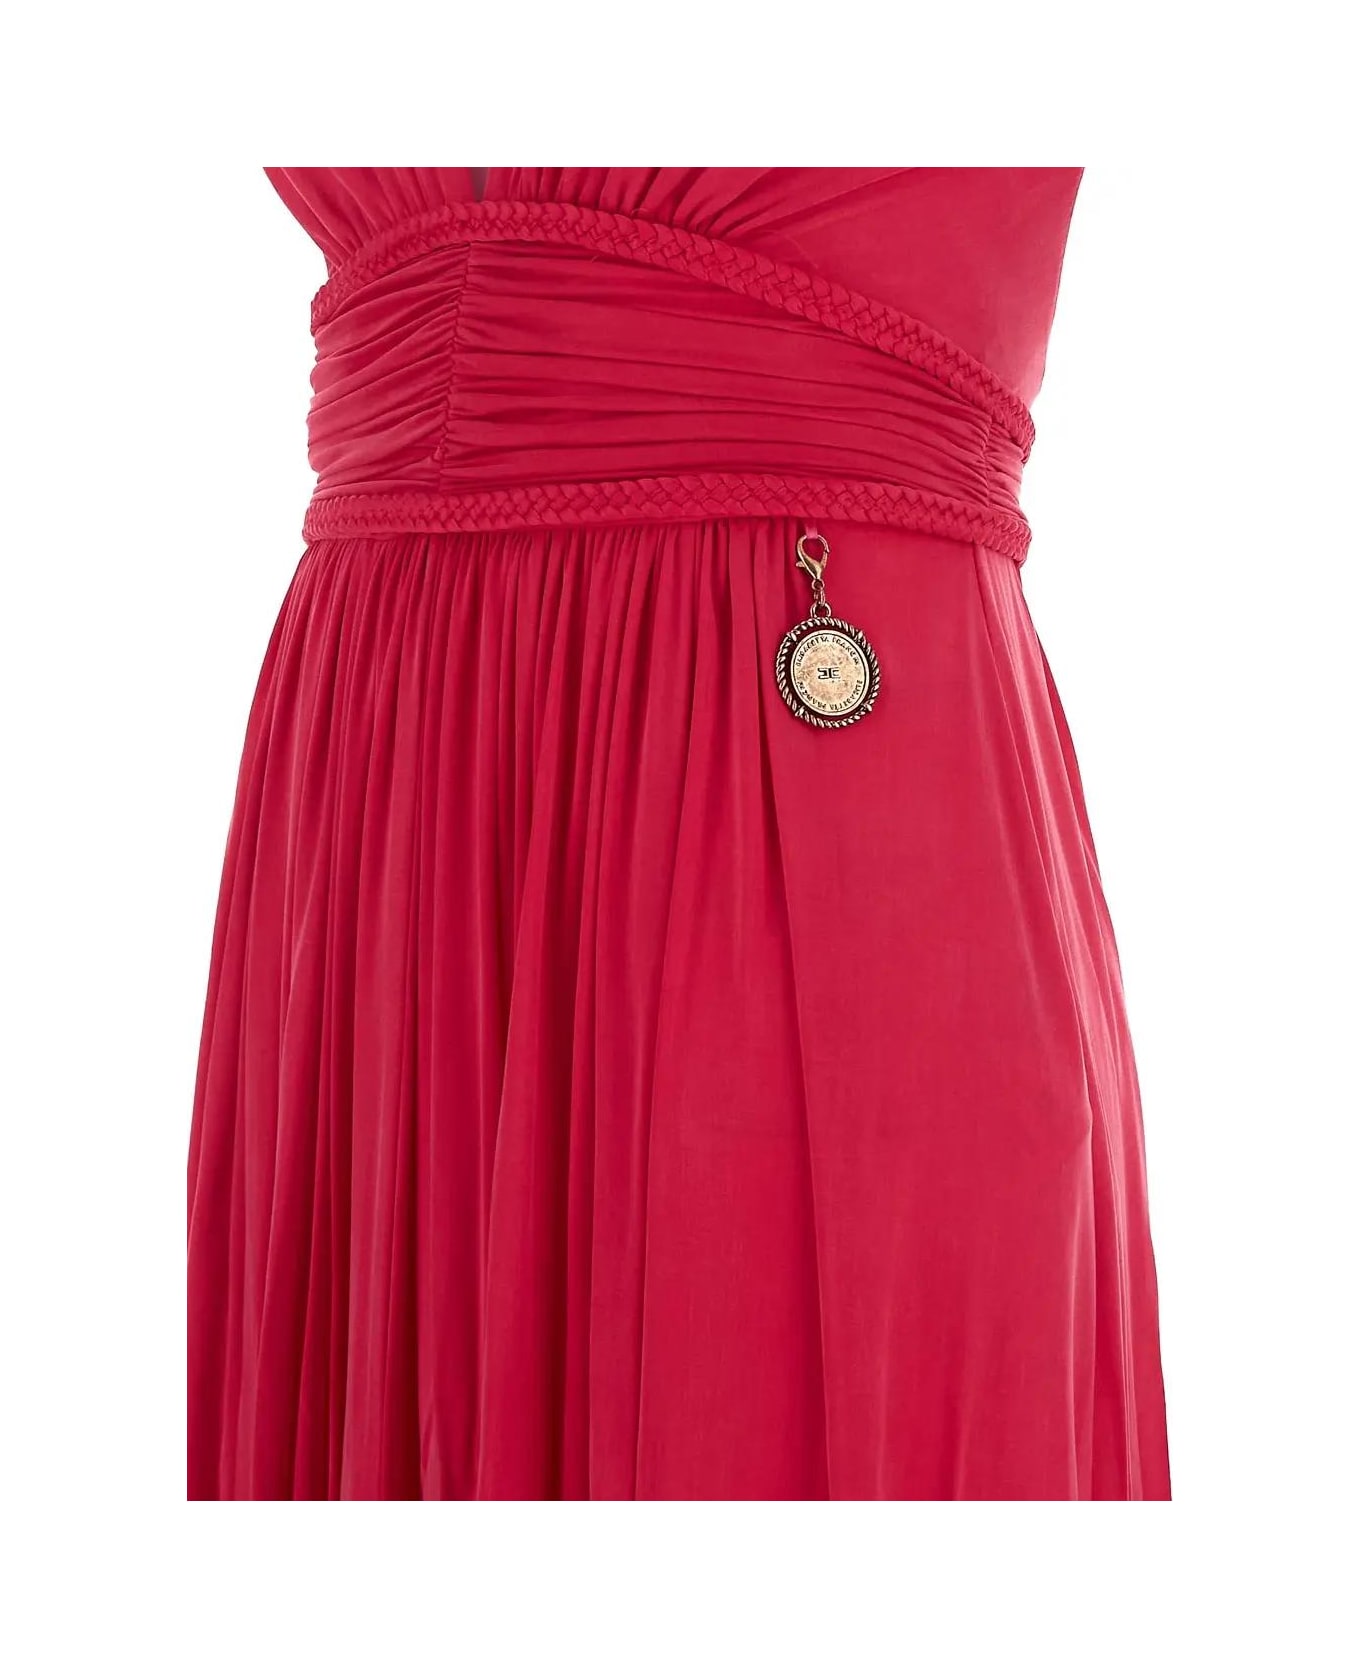 Elisabetta Franchi Red Carpet Dress With Intertwined Straps - PINK ワンピース＆ドレス